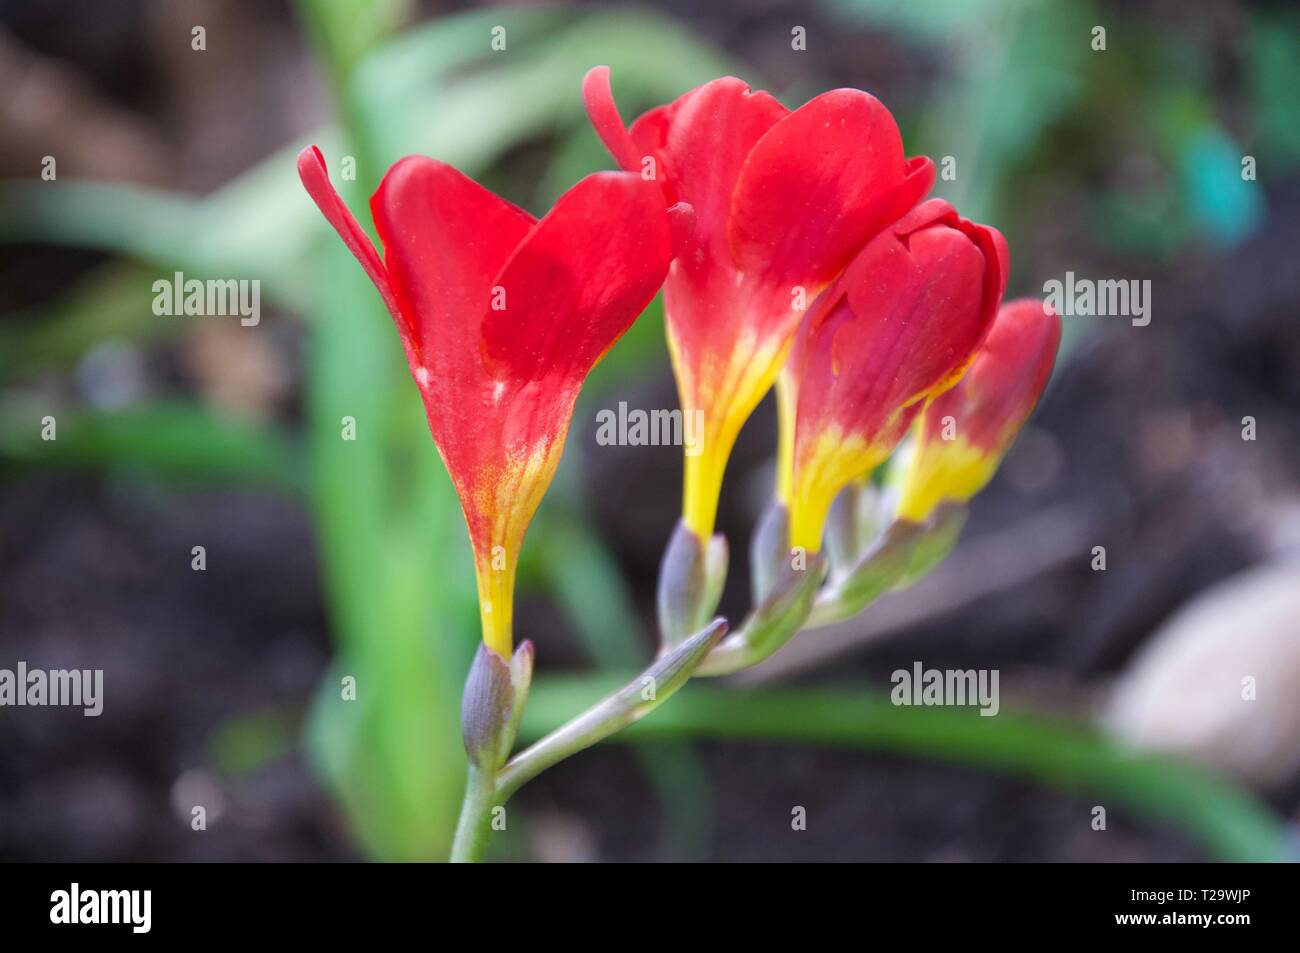 Flowering red and yellow plant freesia in public garden Stock Photo